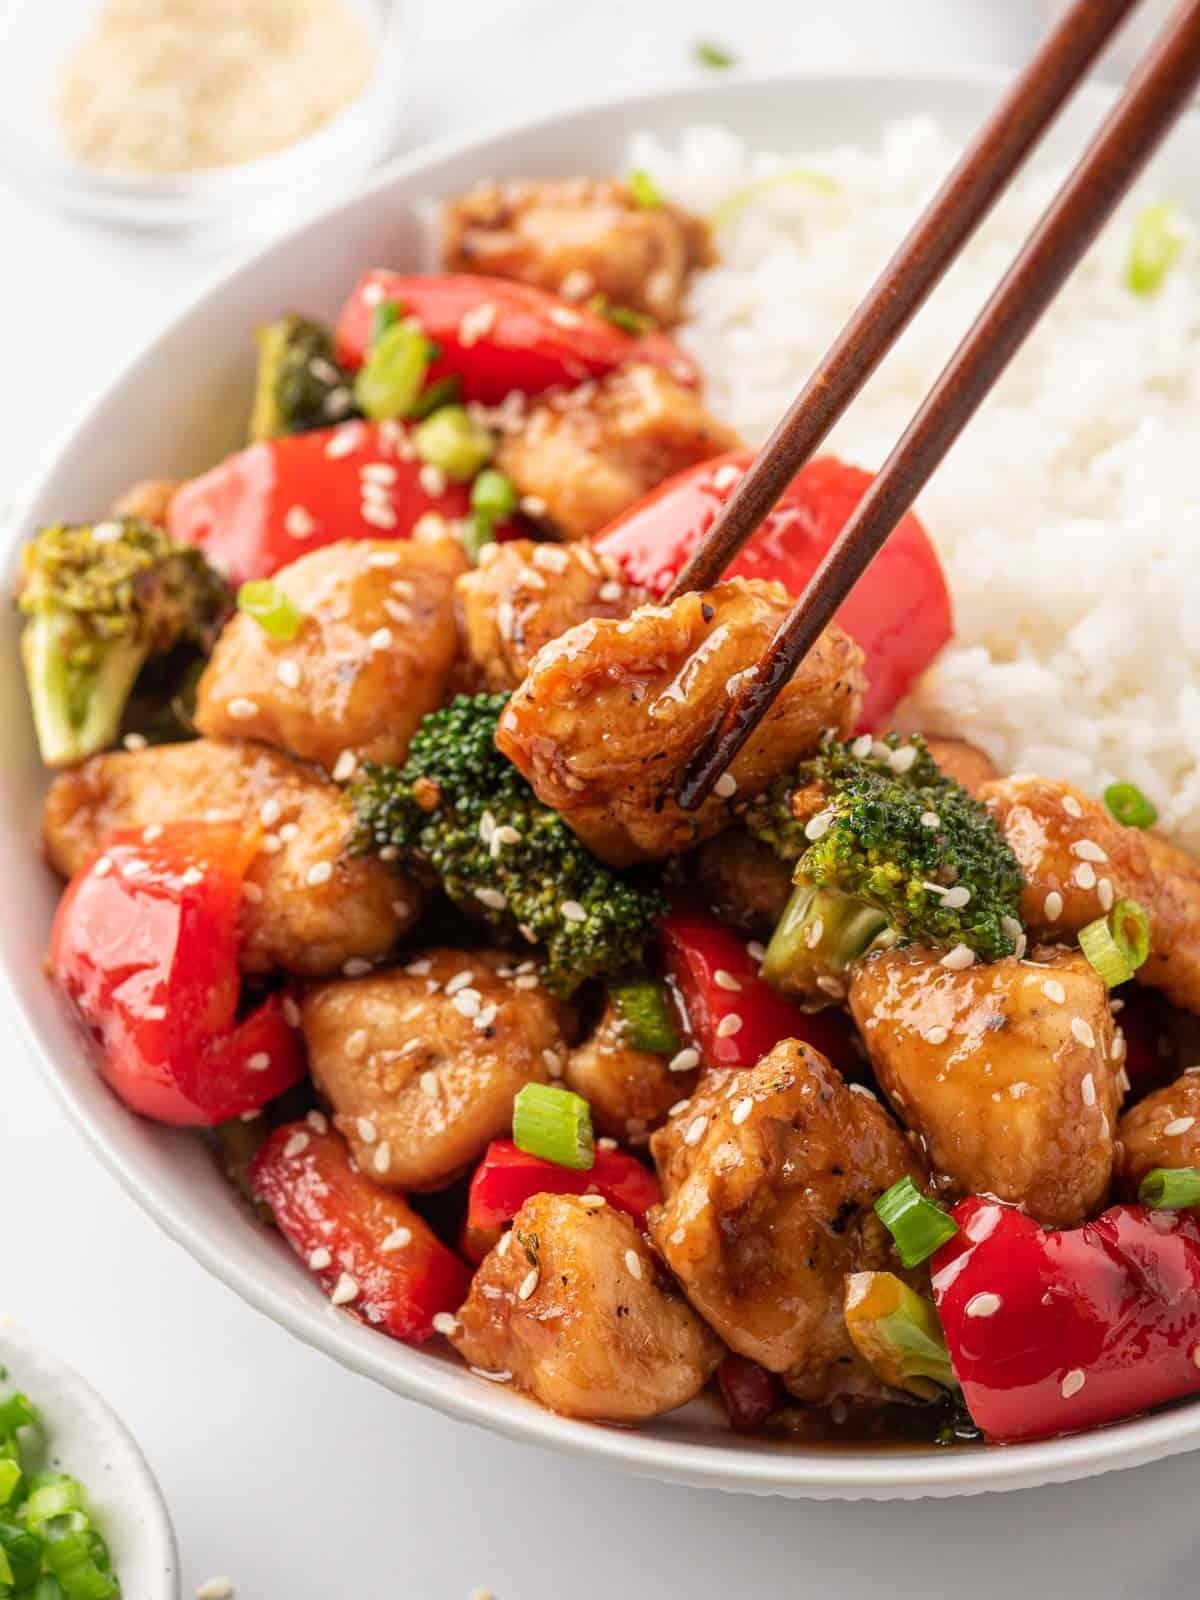 Easy and Delicious One-Pan Chicken Teriyaki Stir Fry Recipe - The ...